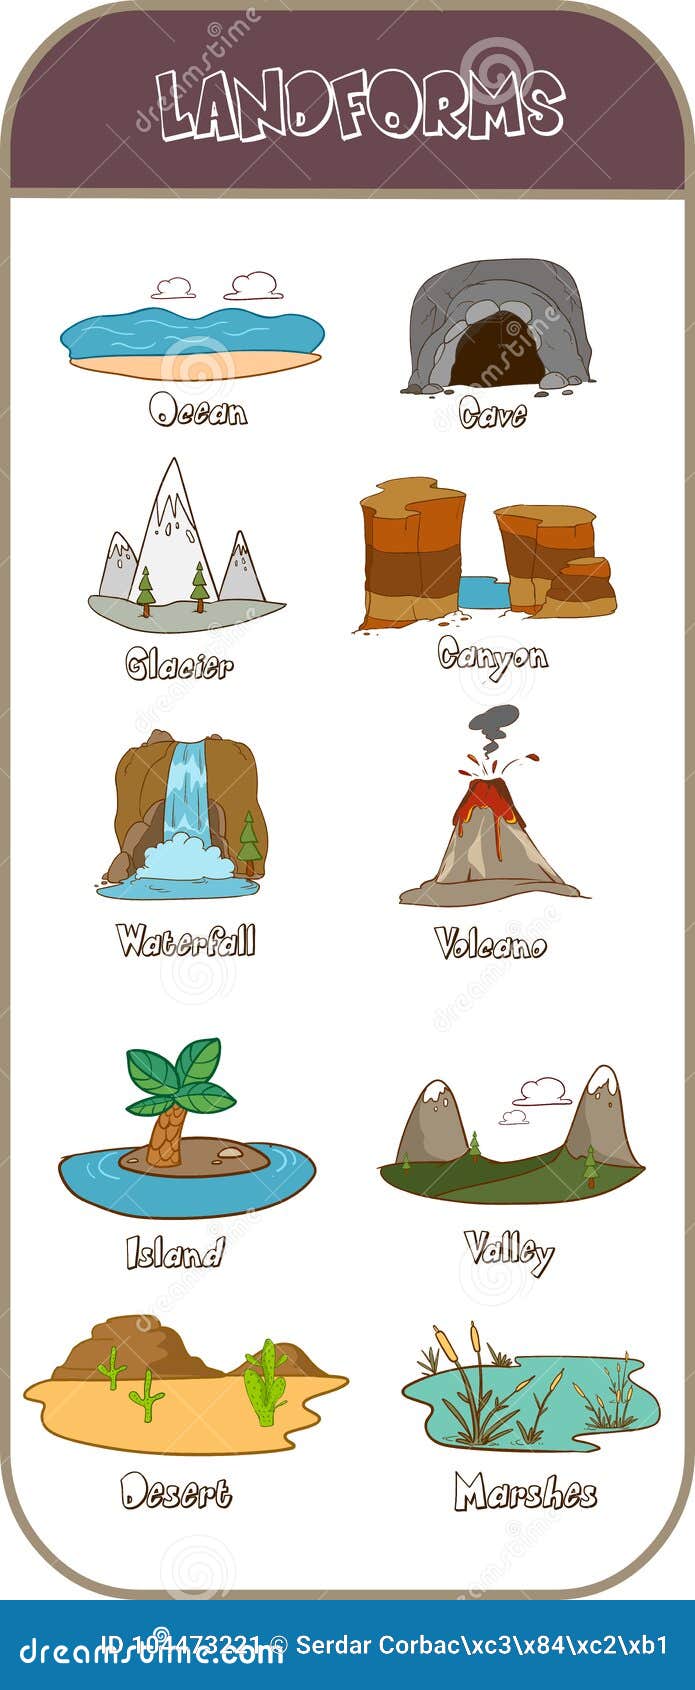   of a learning landforms for kids